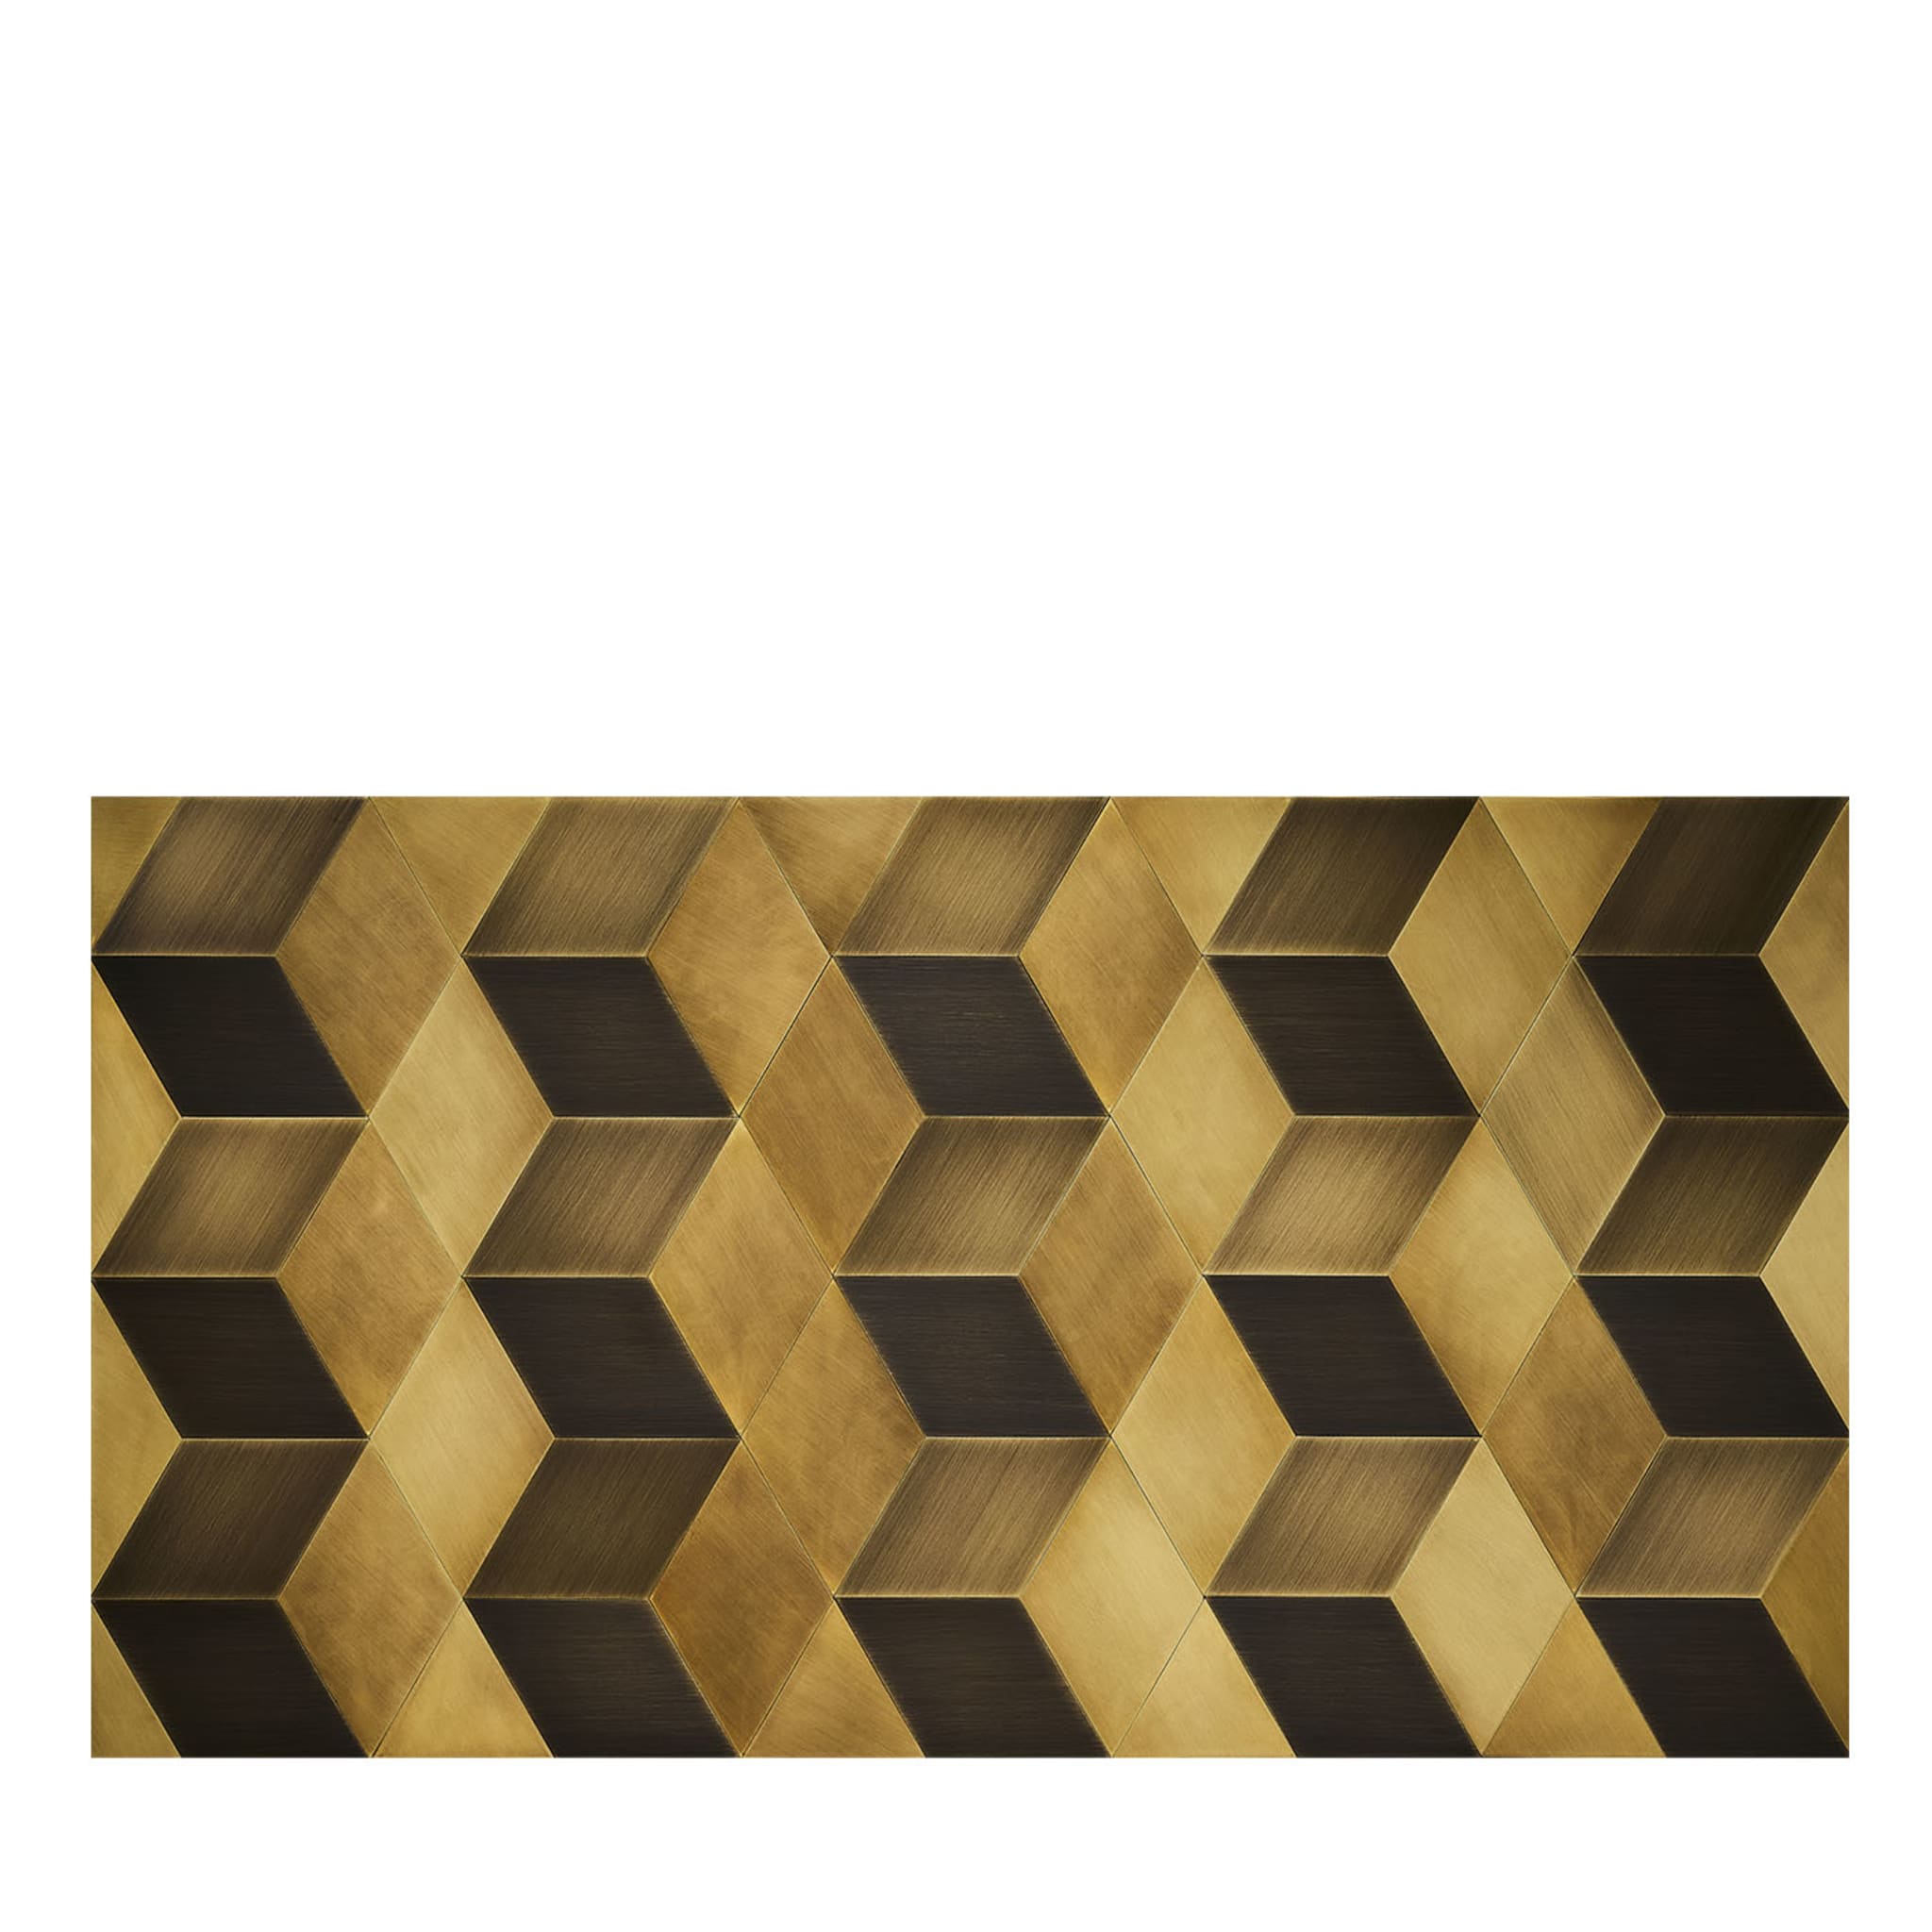 Luce 3D Set of 15 Satin Burnished-Brass Tiles  - Main view